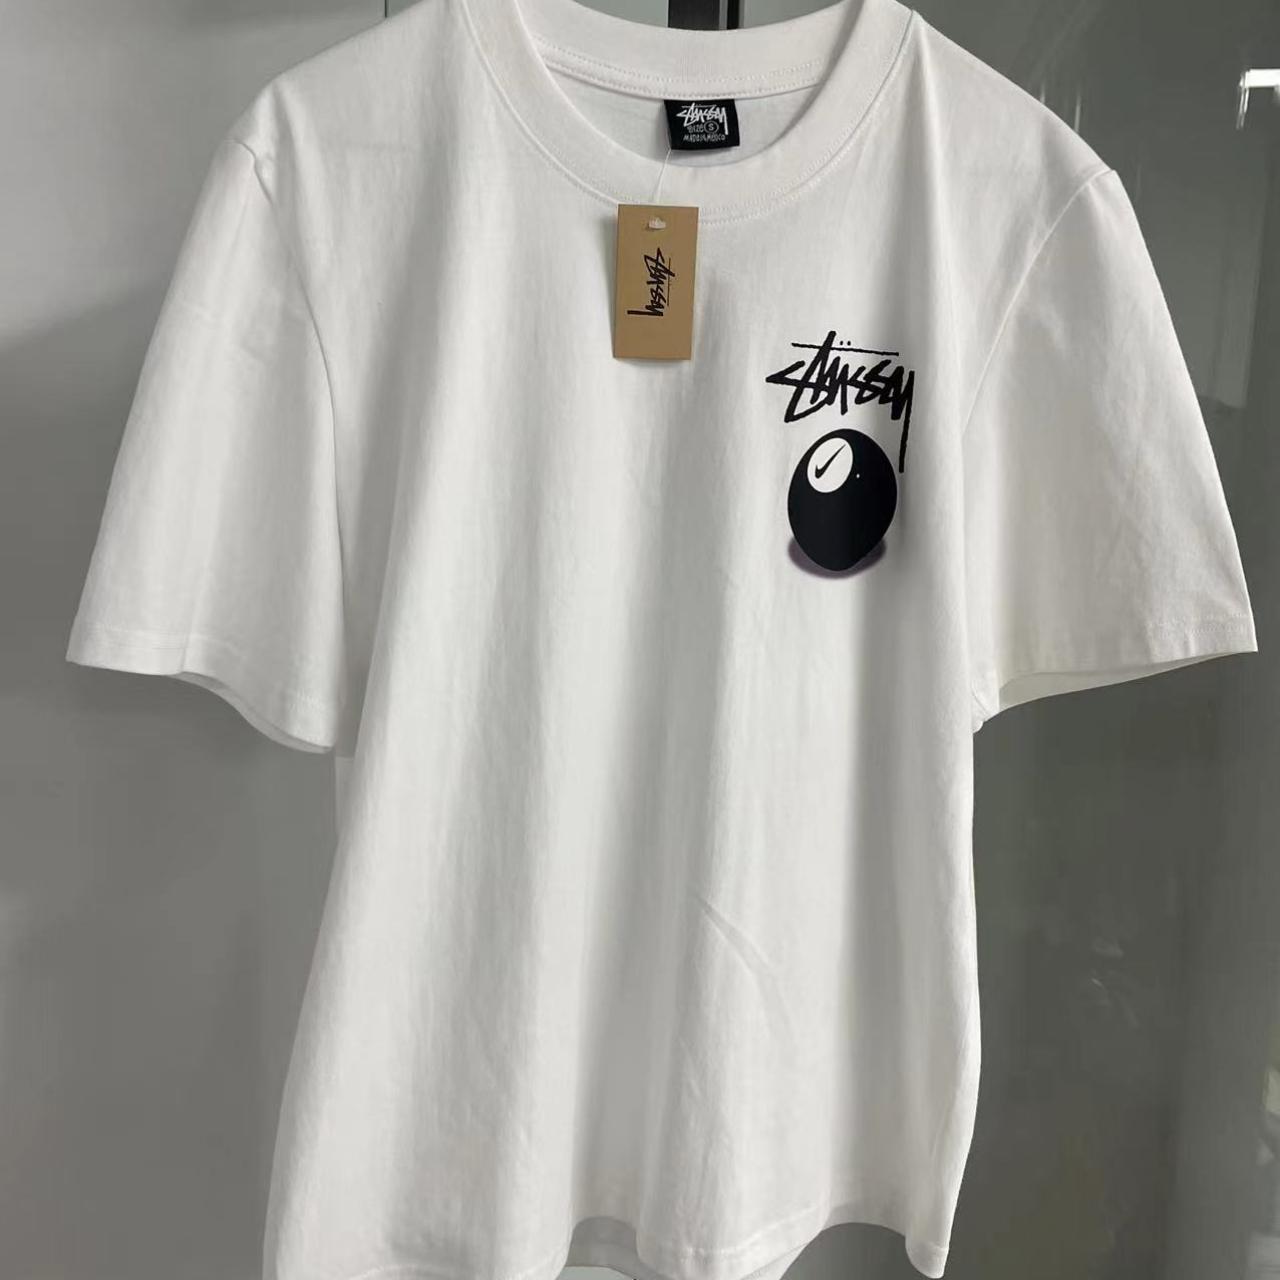 Stussy White T-shirt Accurate size 3 Size With... - Depop